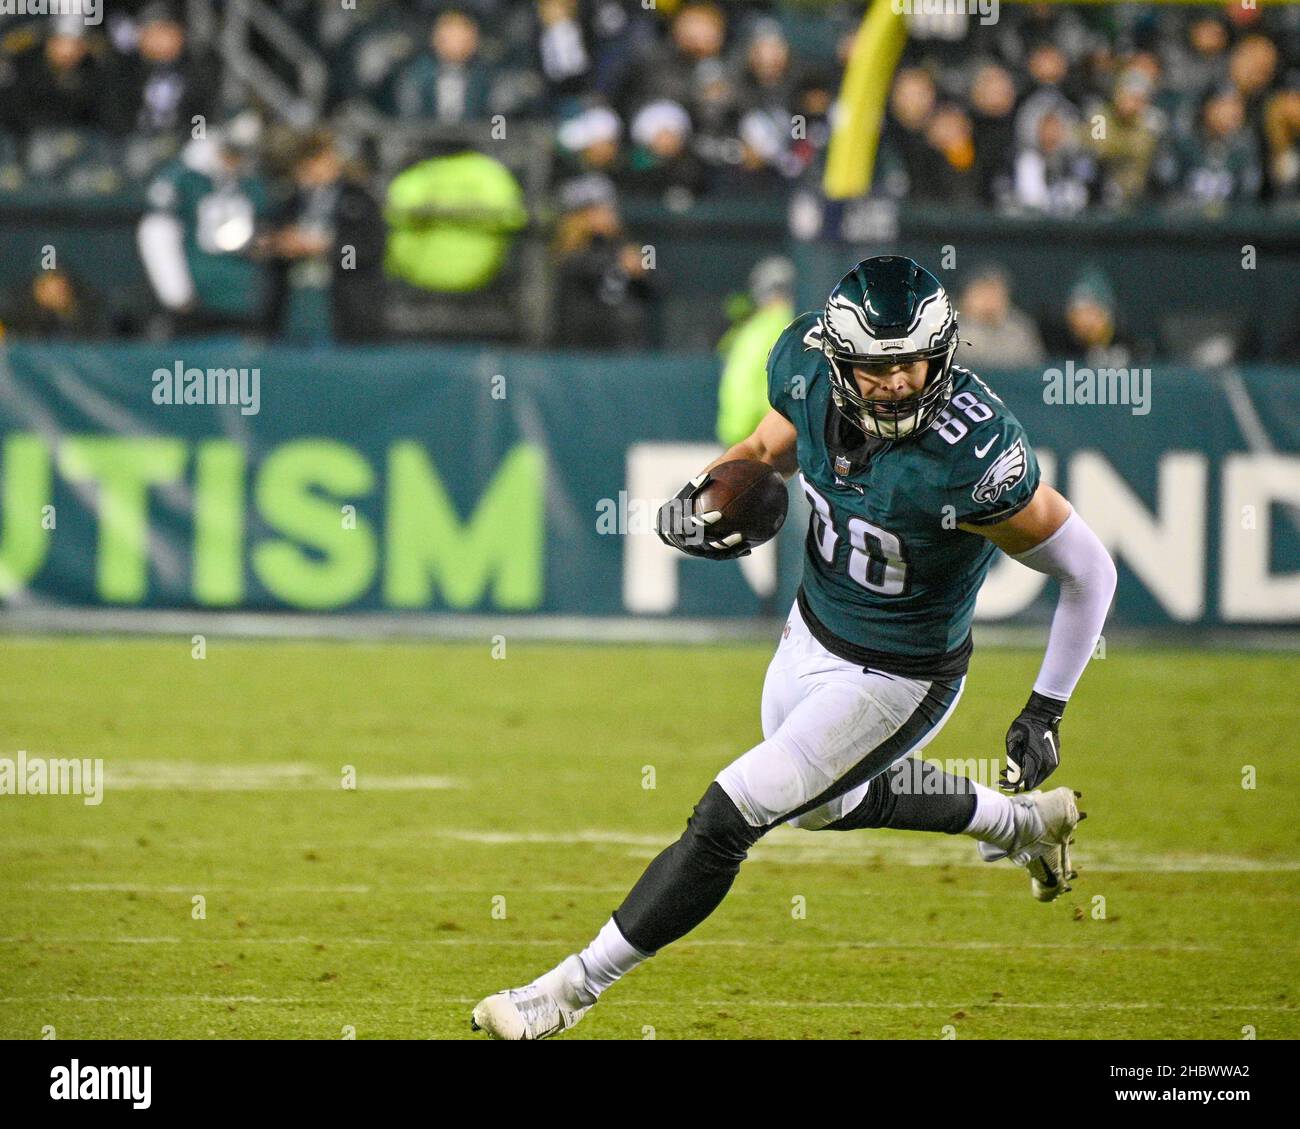 Philadelphia, Pennsylvania, USA. 21st Dec, 2021. December 21, 2021, Philadelphia PA- Eagles DALLAS GOEDERT TE (88) in action during the game against the WFT at Lincoln Financial Field (Credit Image: © Ricky Fitchett/ZUMA Press Wire) Stock Photo